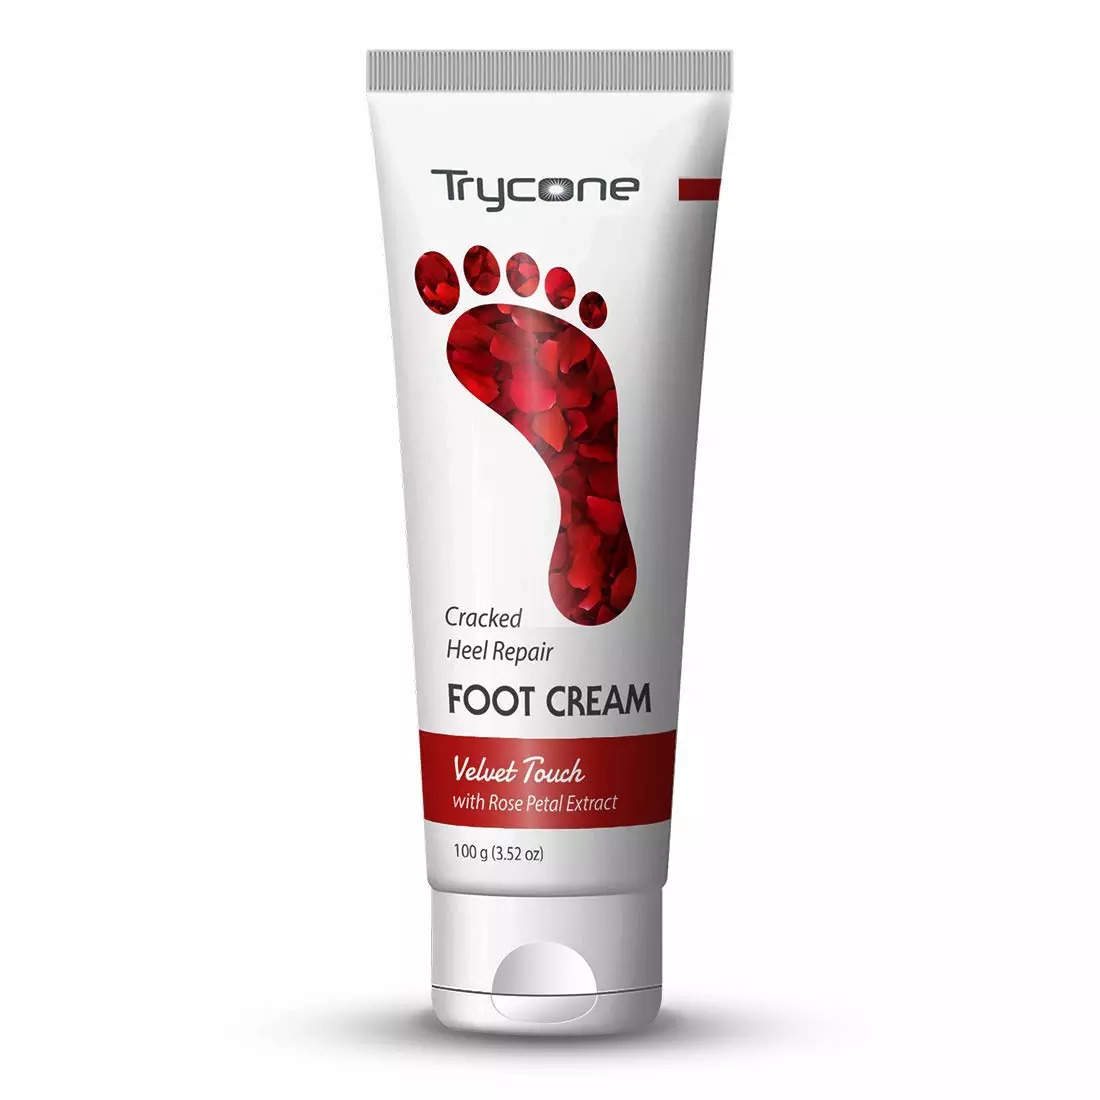 20 High Quality Best Foot Creams for Cracked Heels